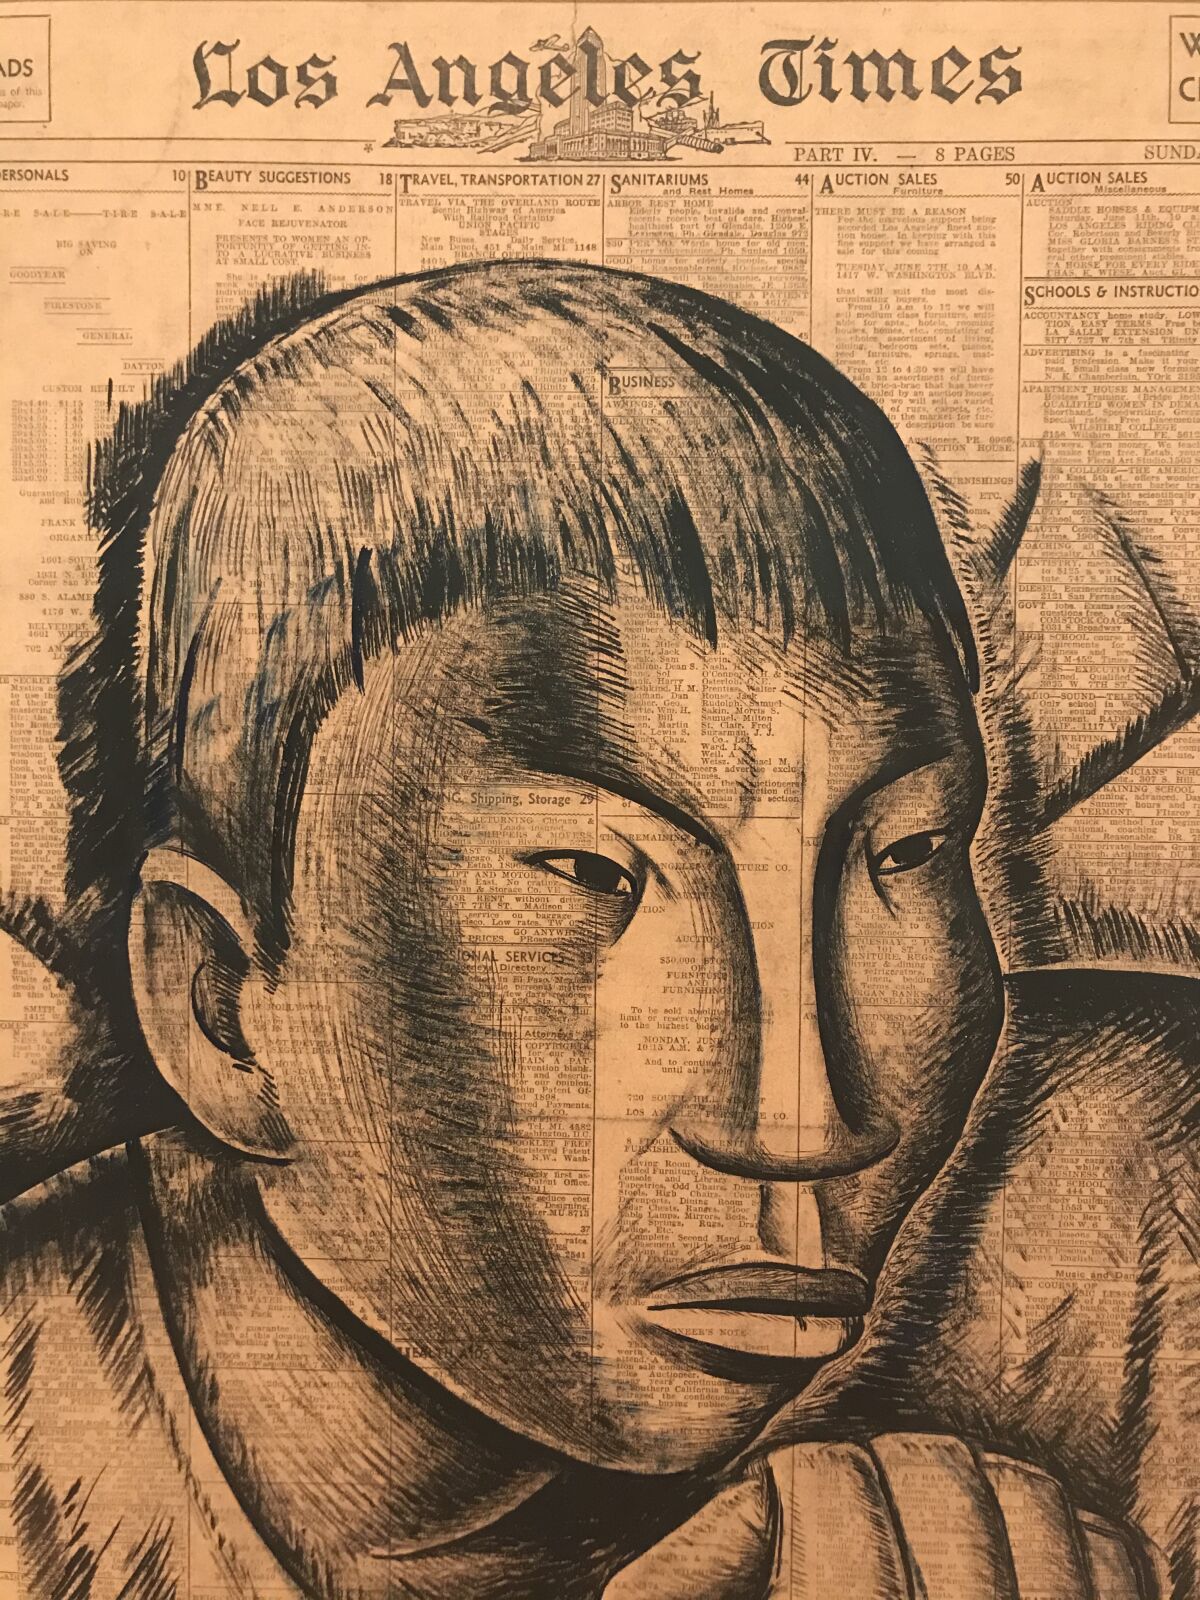 A black chalk drawing on vintage Los Angeles Times newsprint shows the face of an Indigenous man 